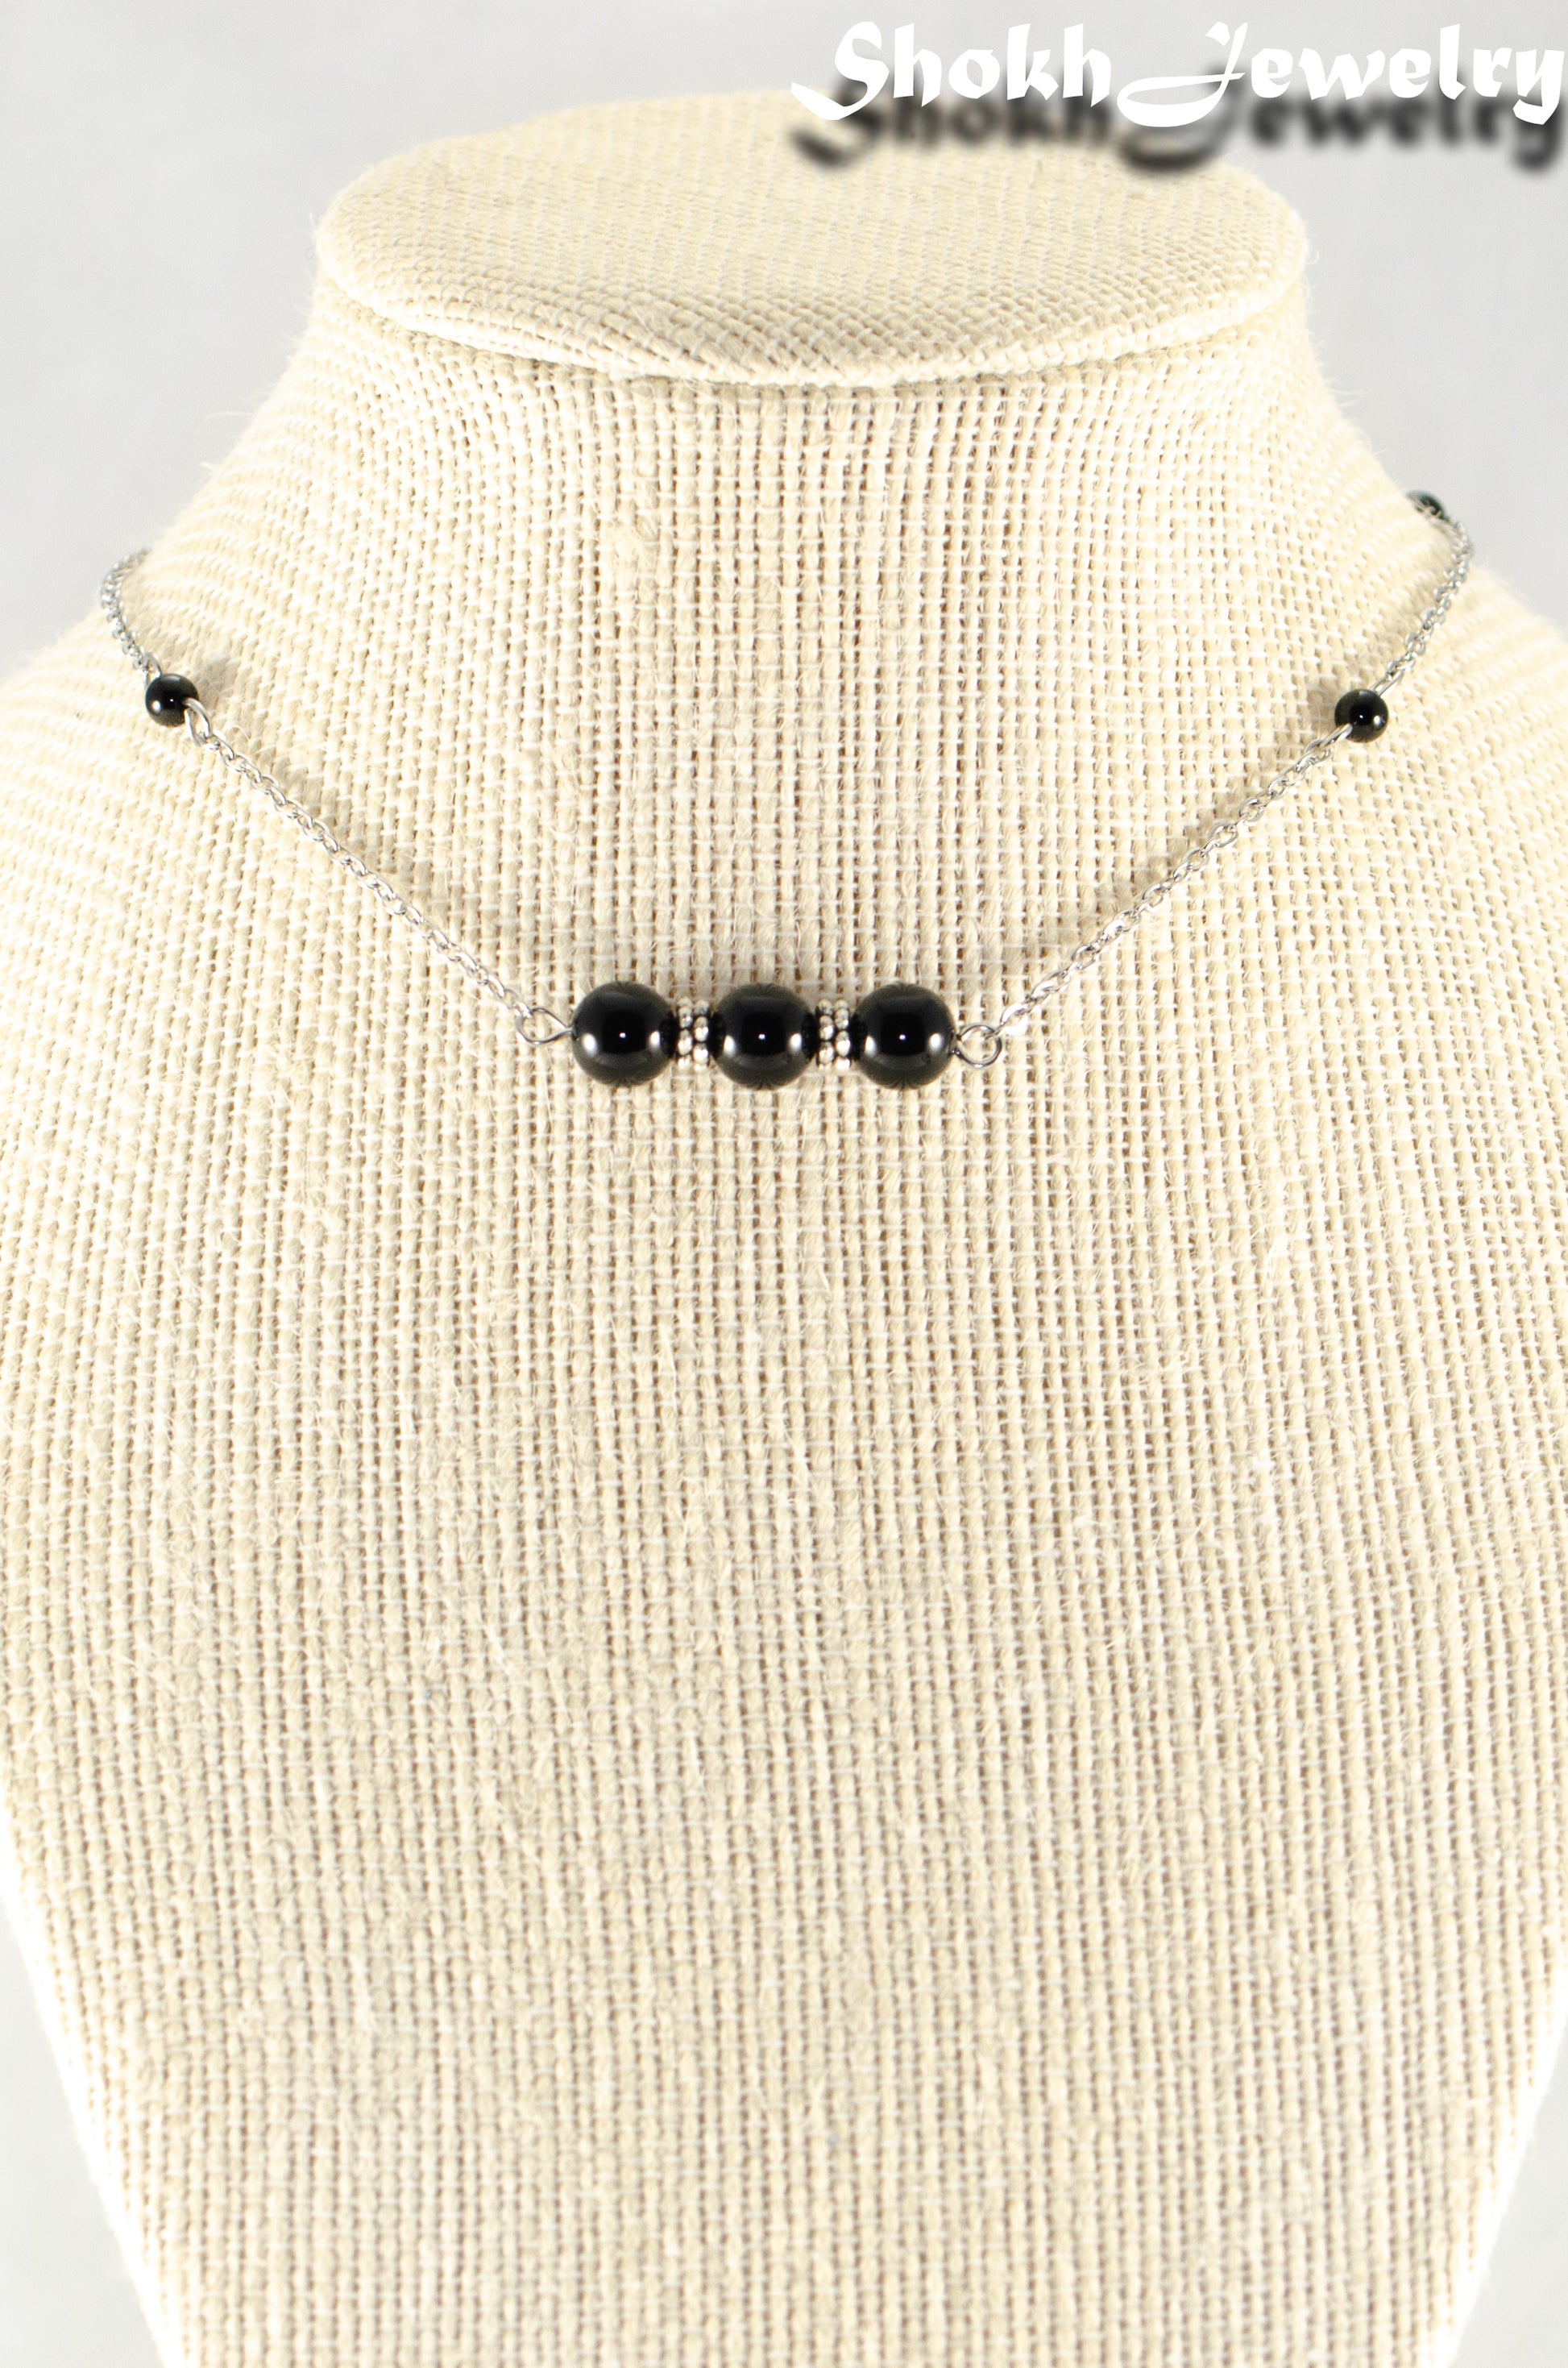 Close up of Natural Black Onyx and Chain Choker Necklace.